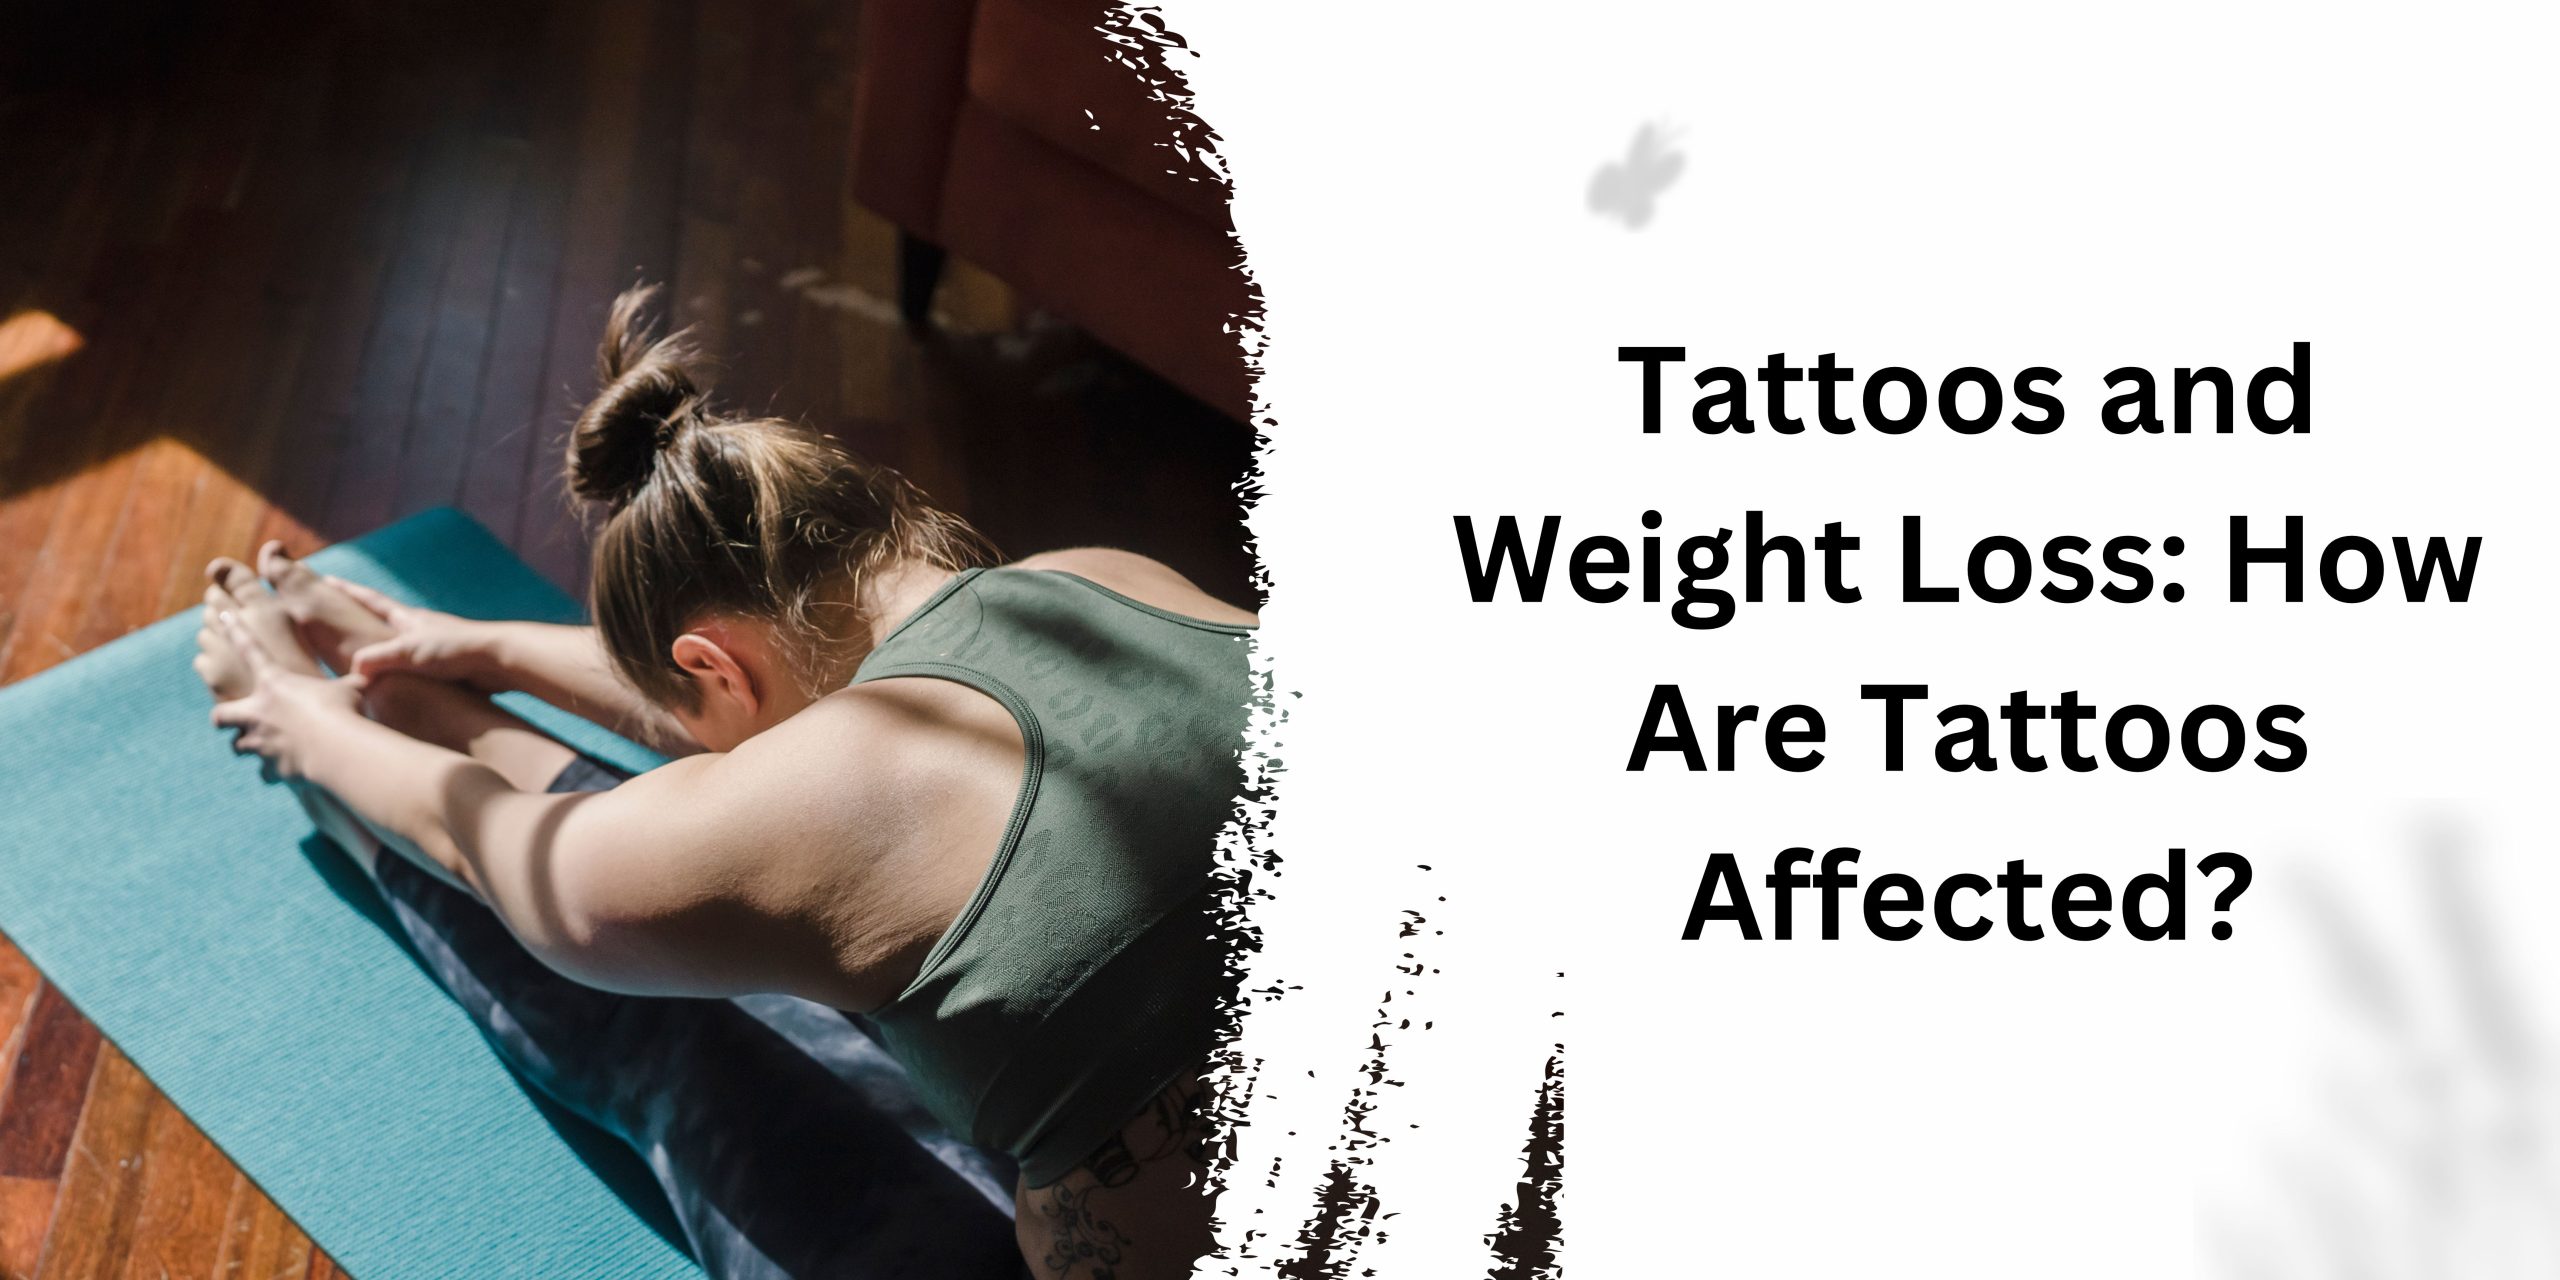 How are tattoos affected by weight loss